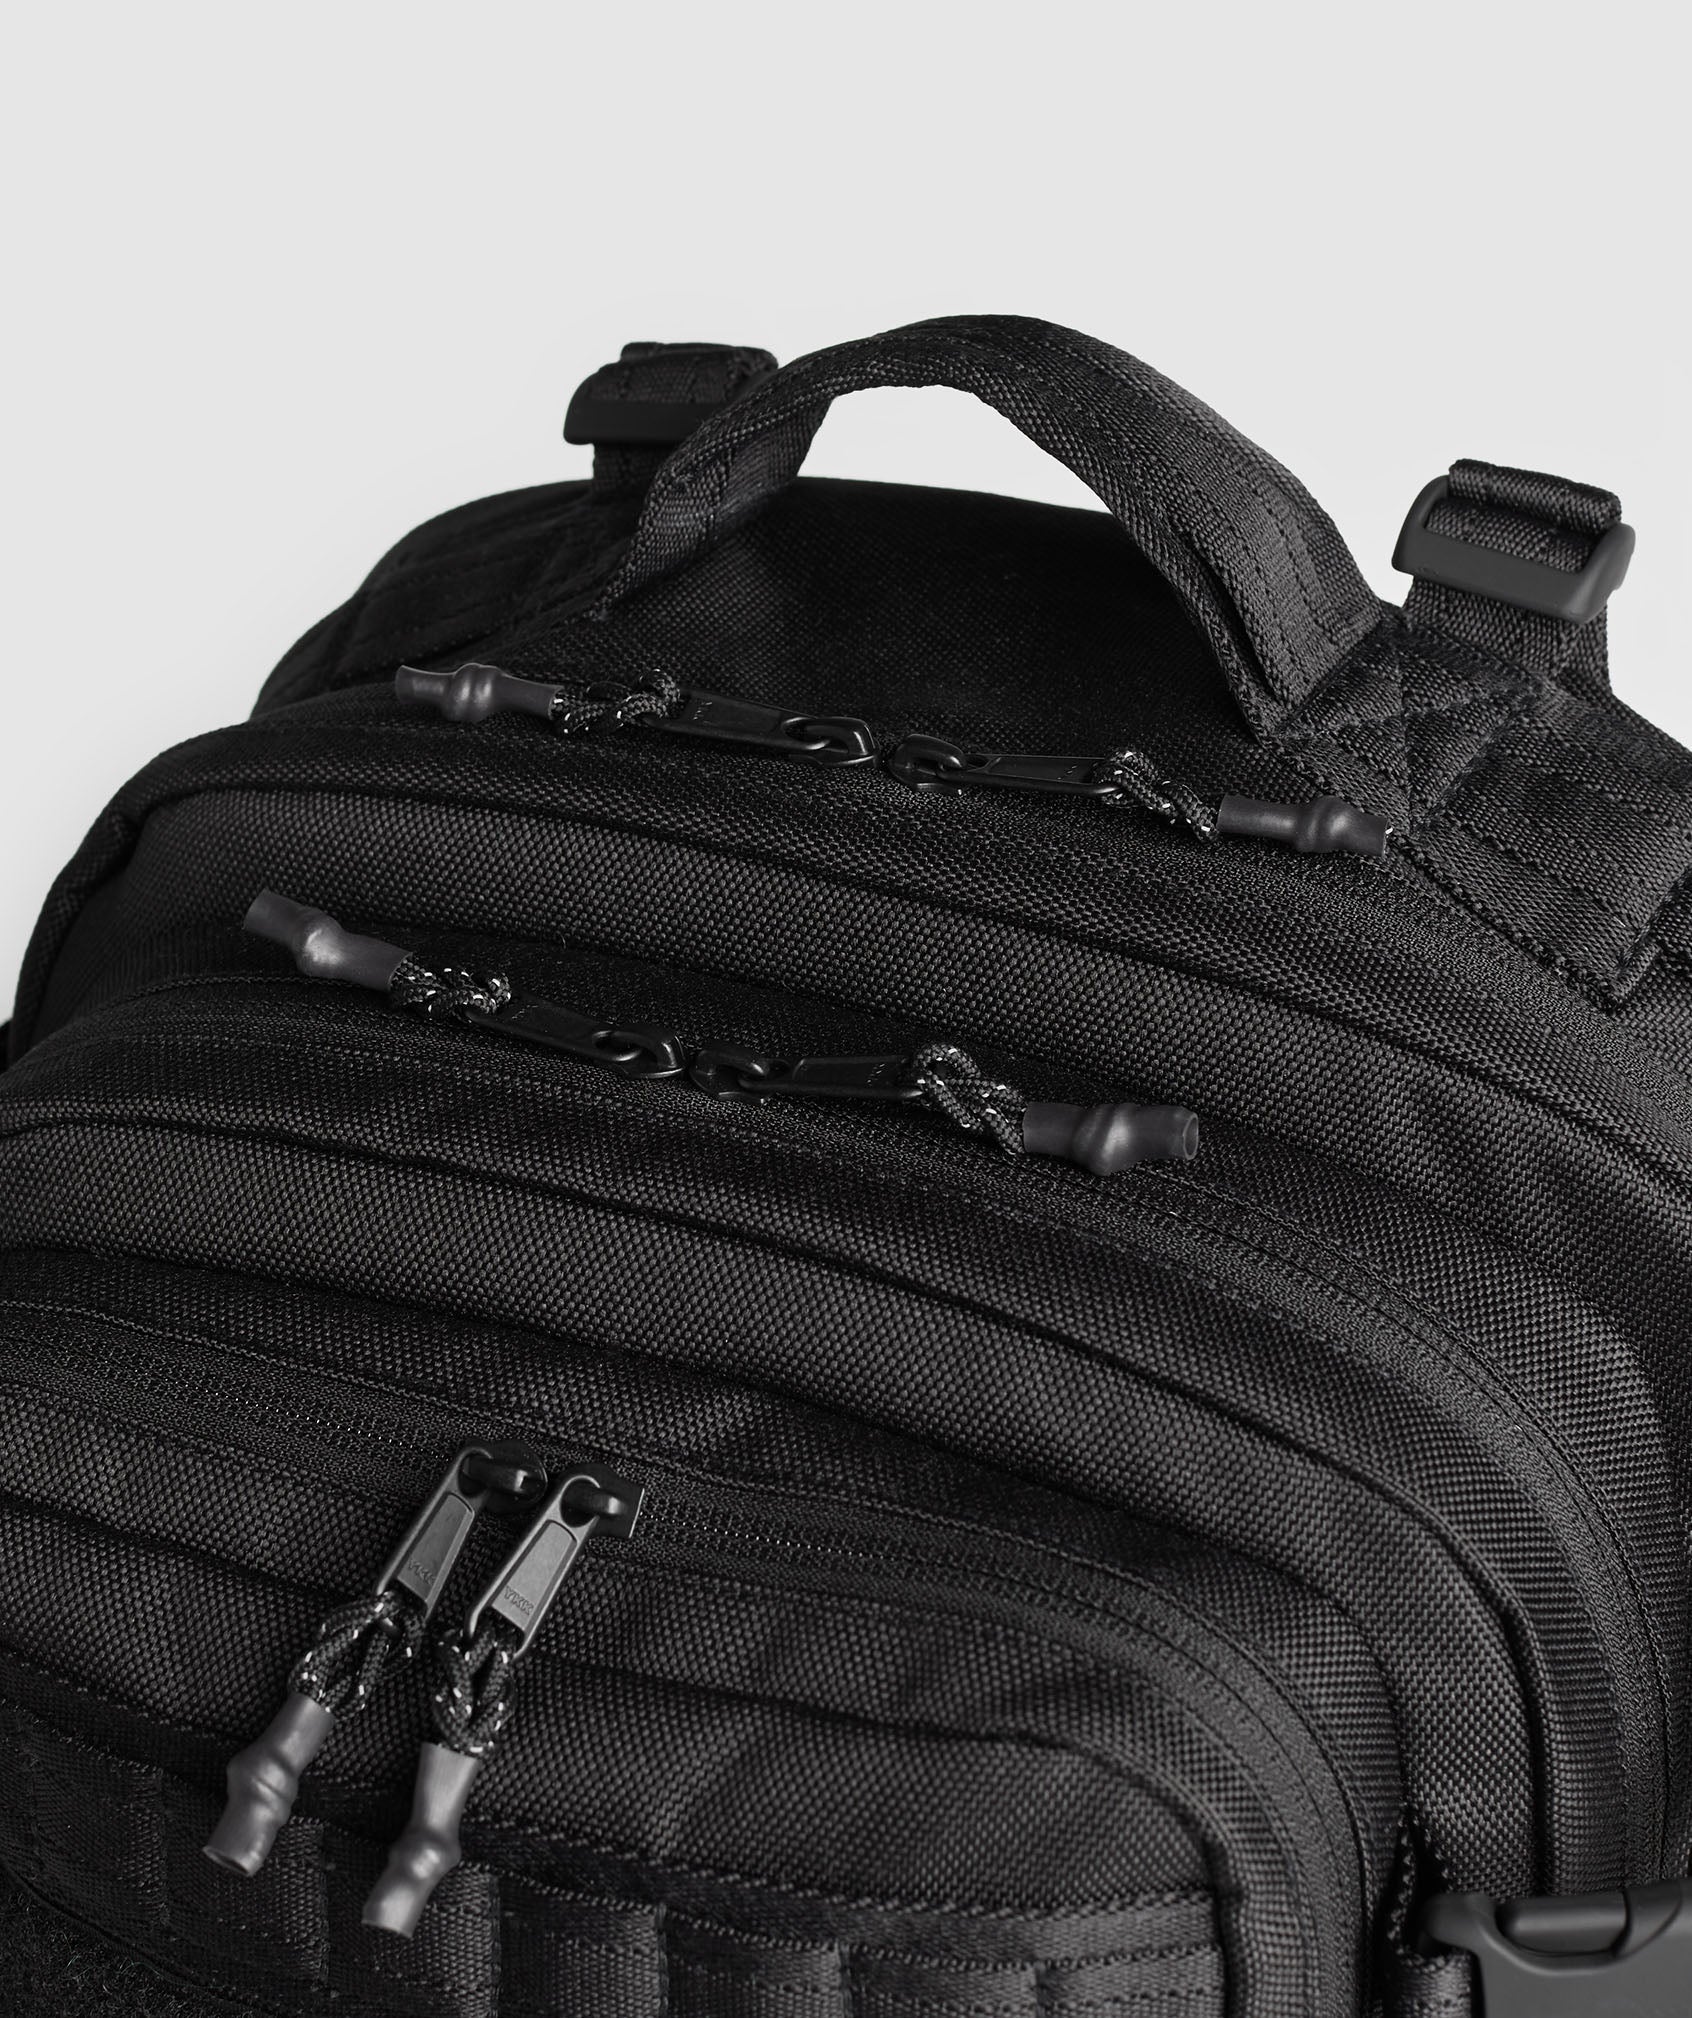 Tactical Backpack in Black - view 6